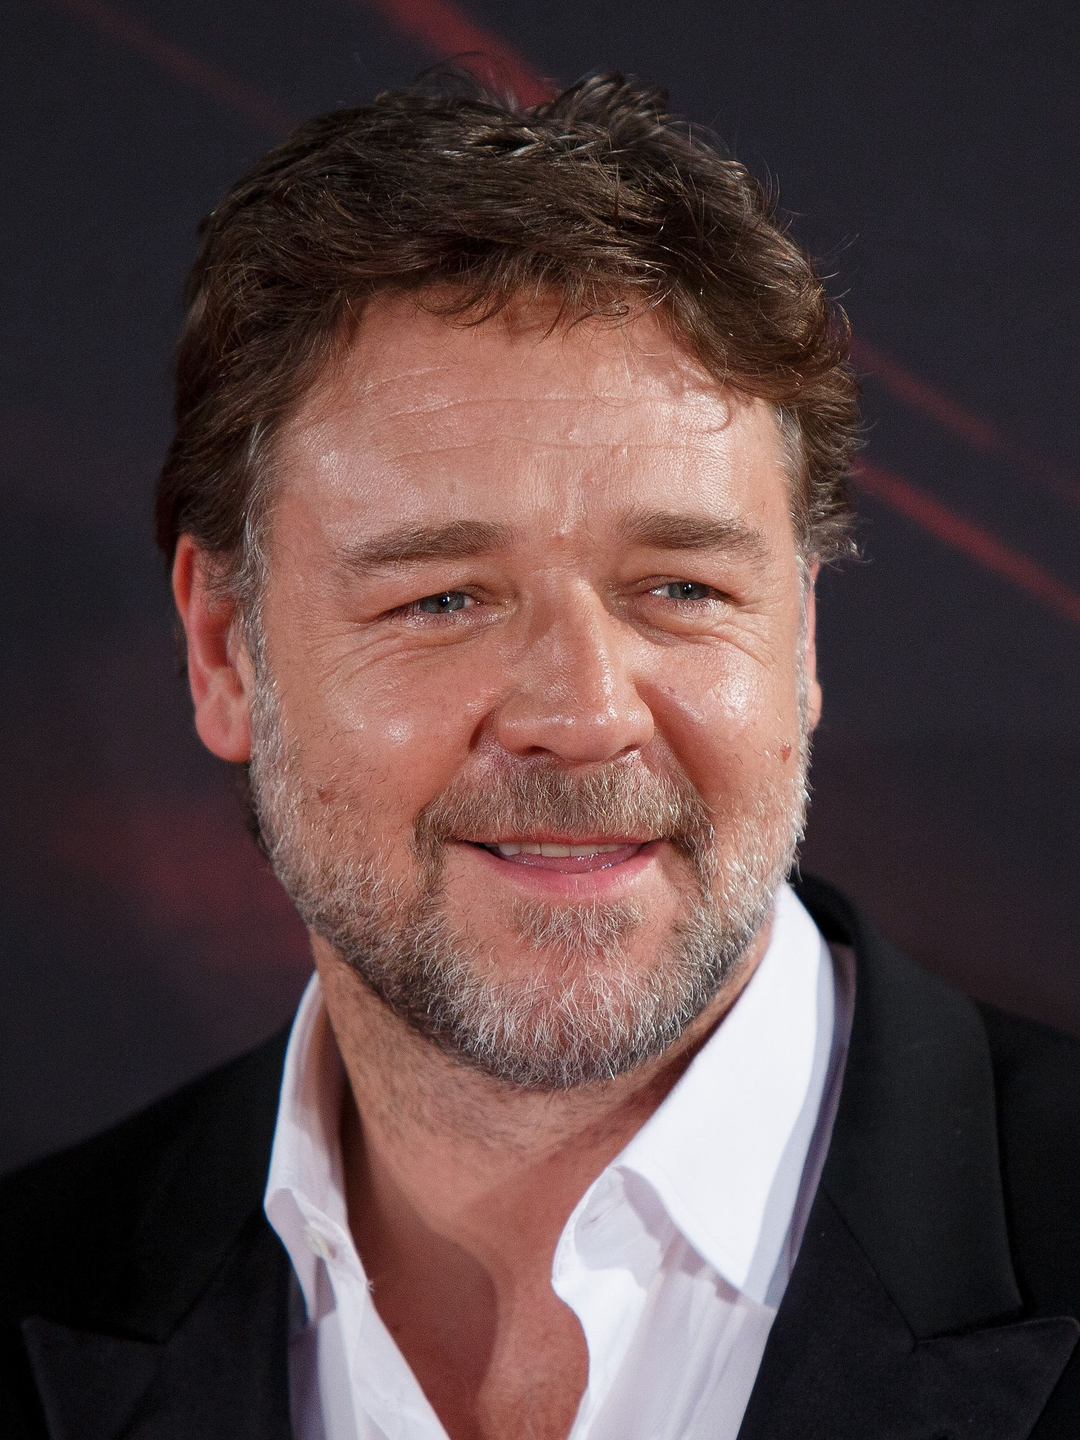 Russell Crowe who is his mother